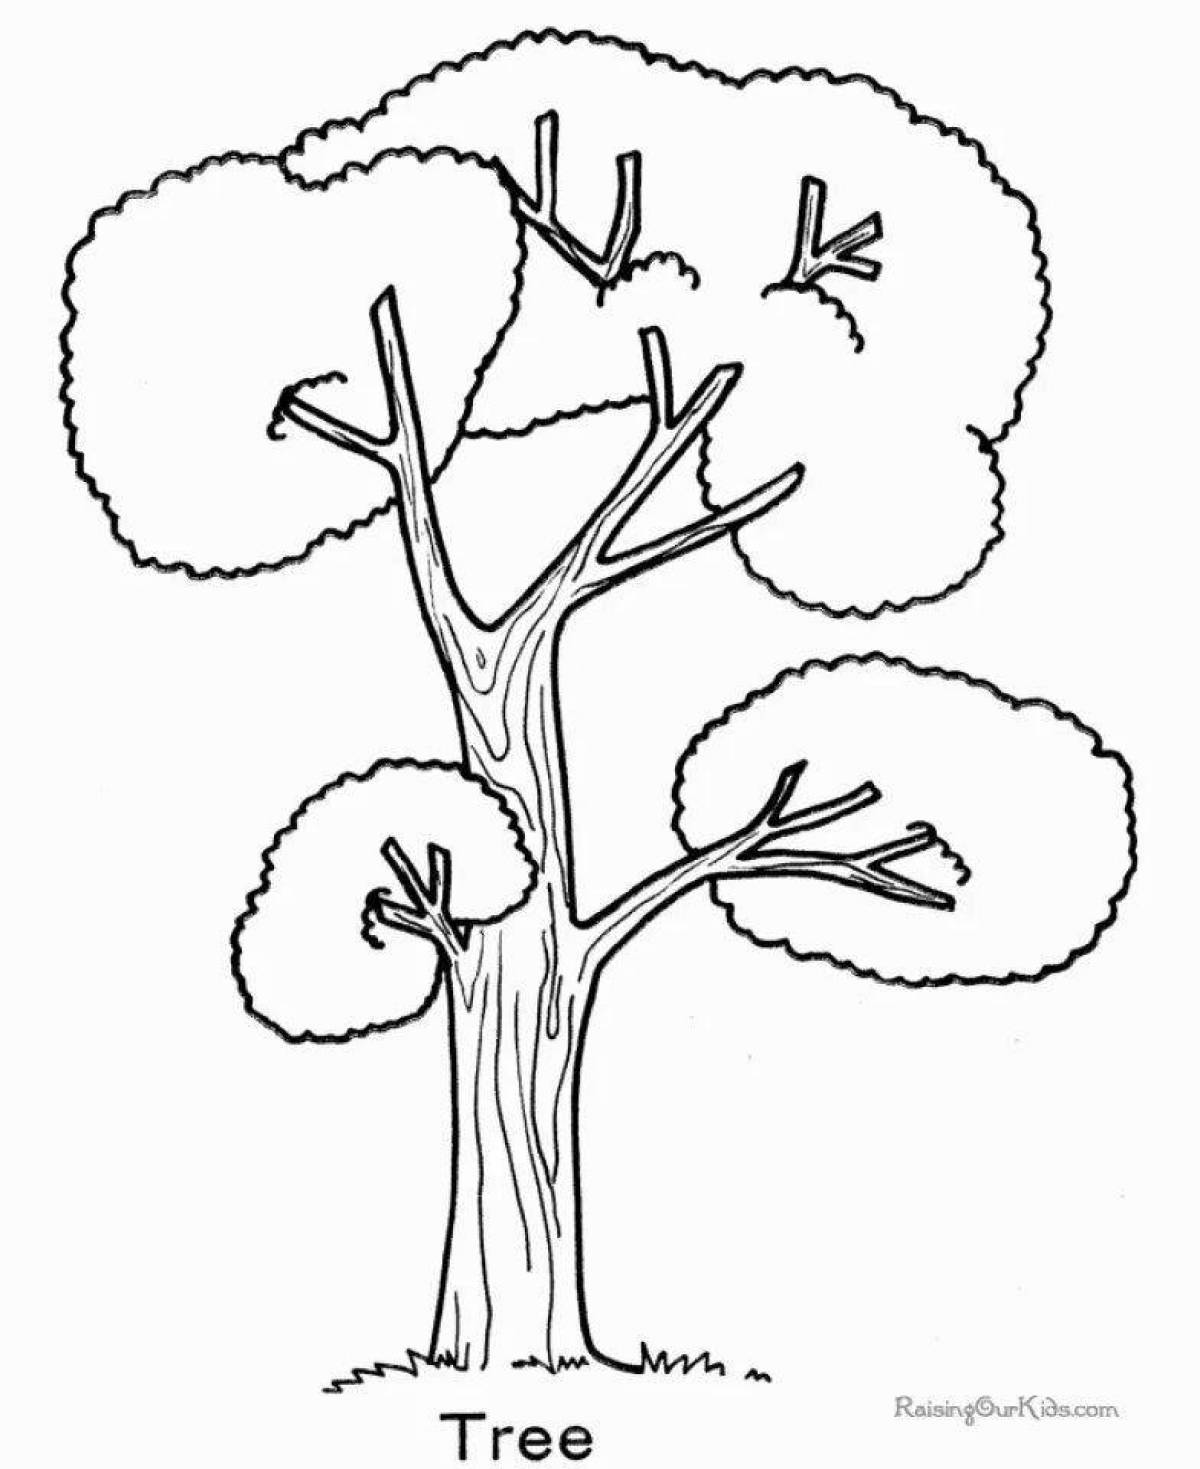 Adorable winter tree coloring page